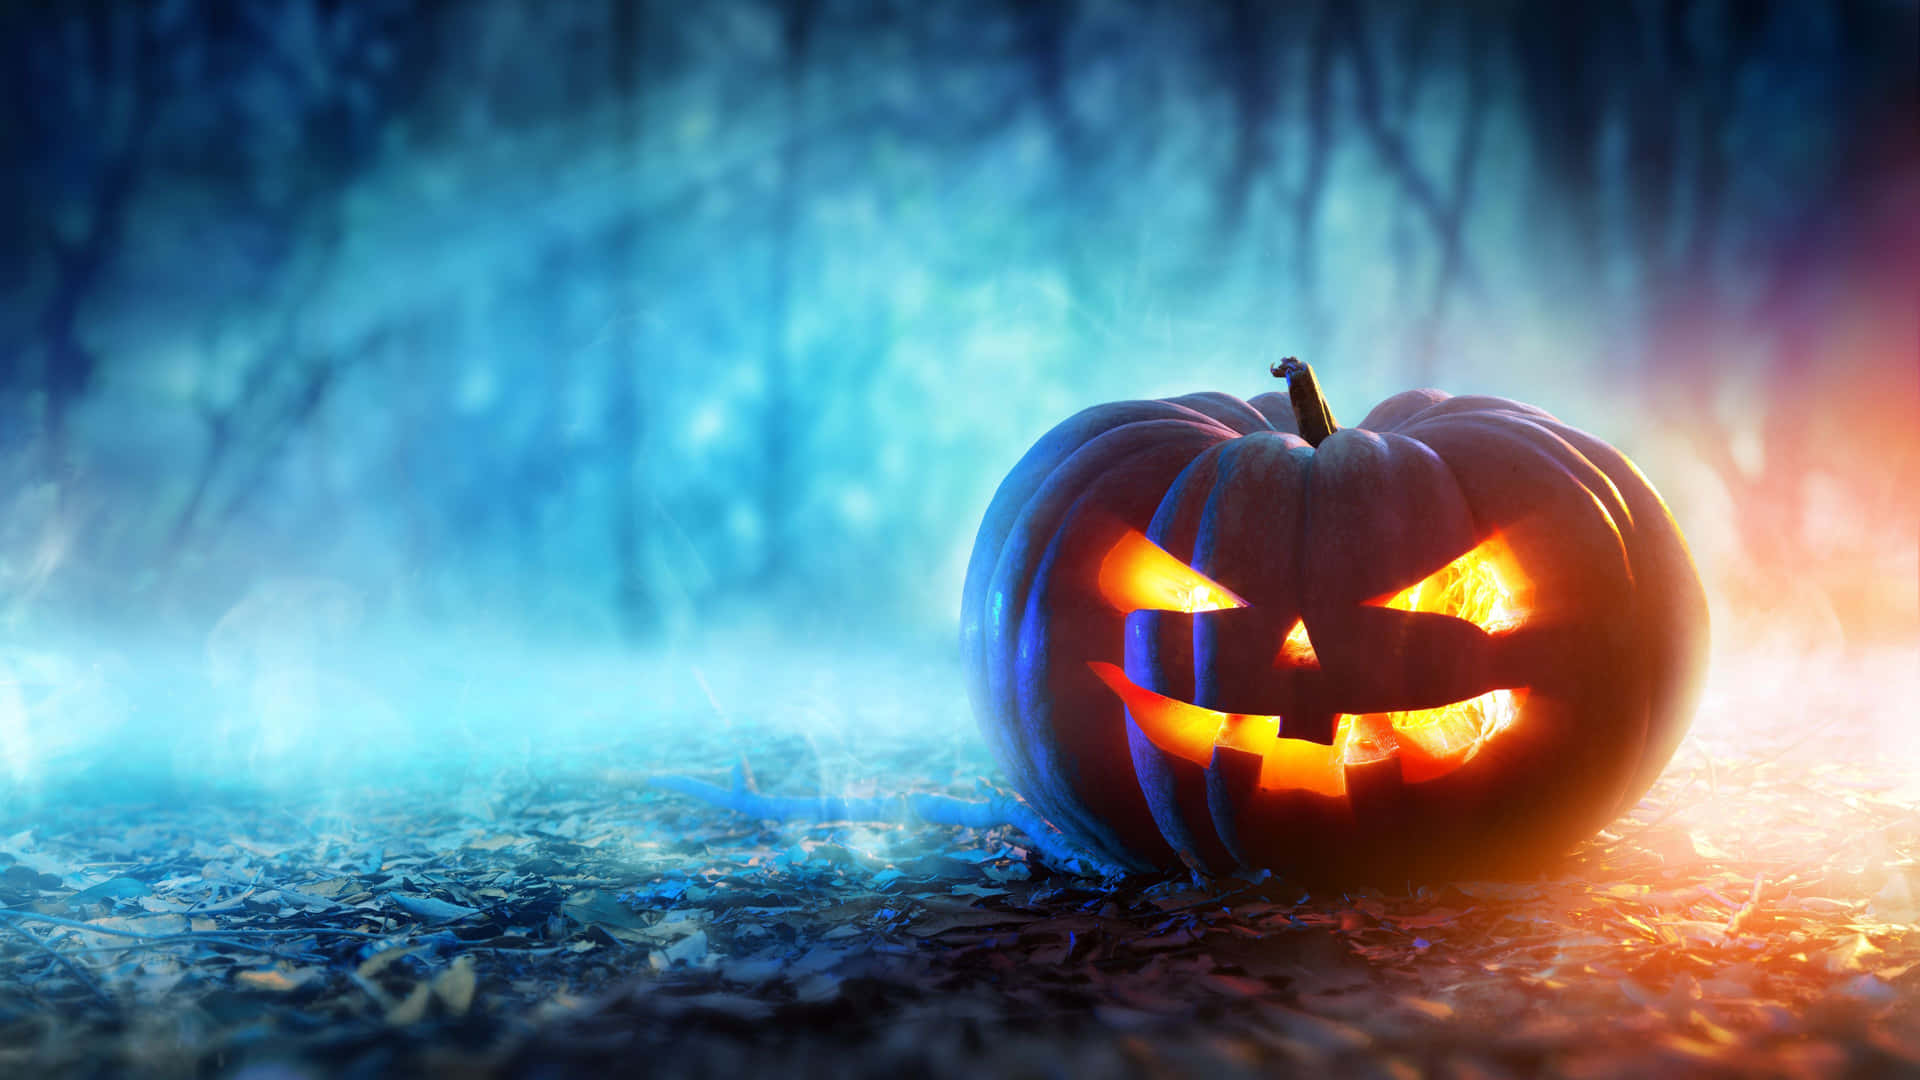 Trick or Treat? It's time for a spooky Halloween! Wallpaper